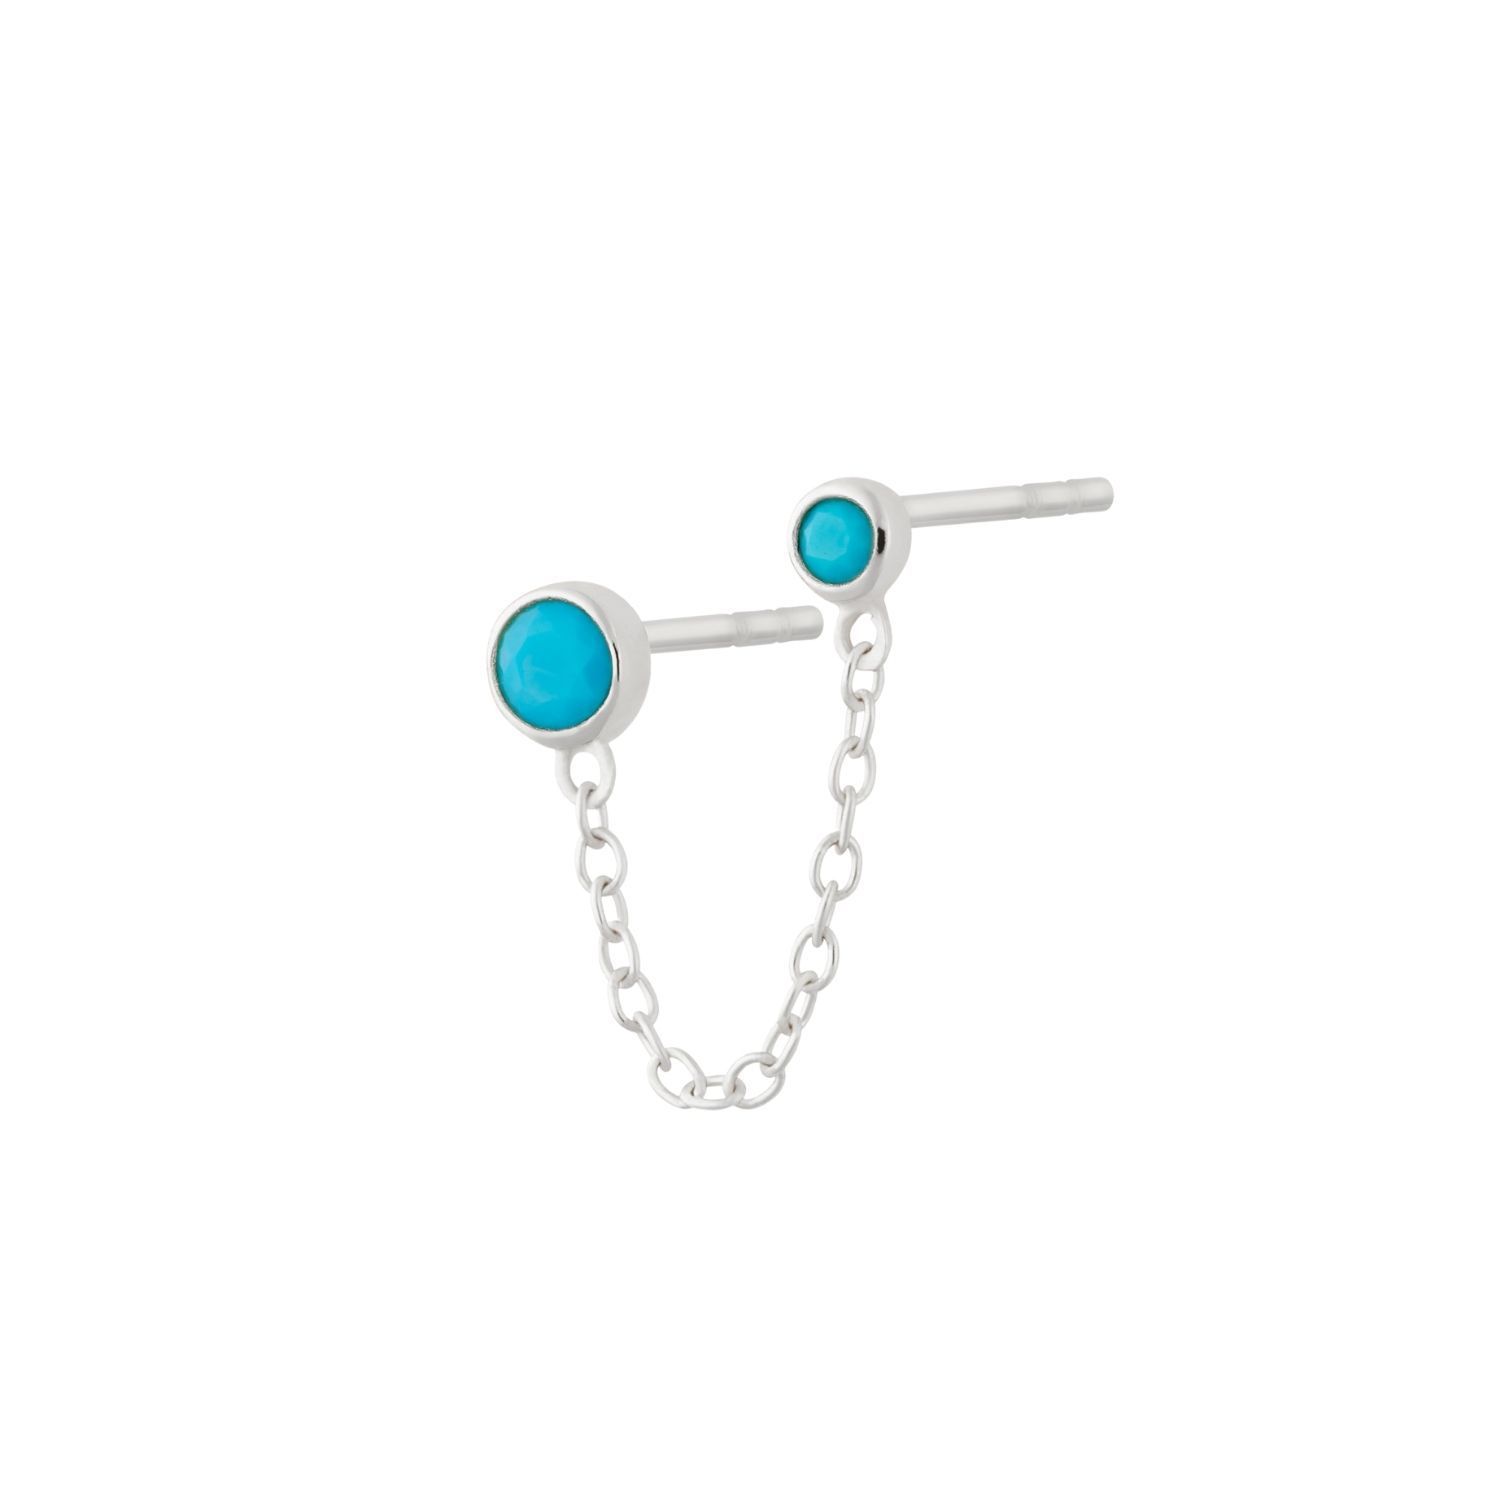  Turquoise Double Stud Single Earring with Chain Connector - by Scream Pretty